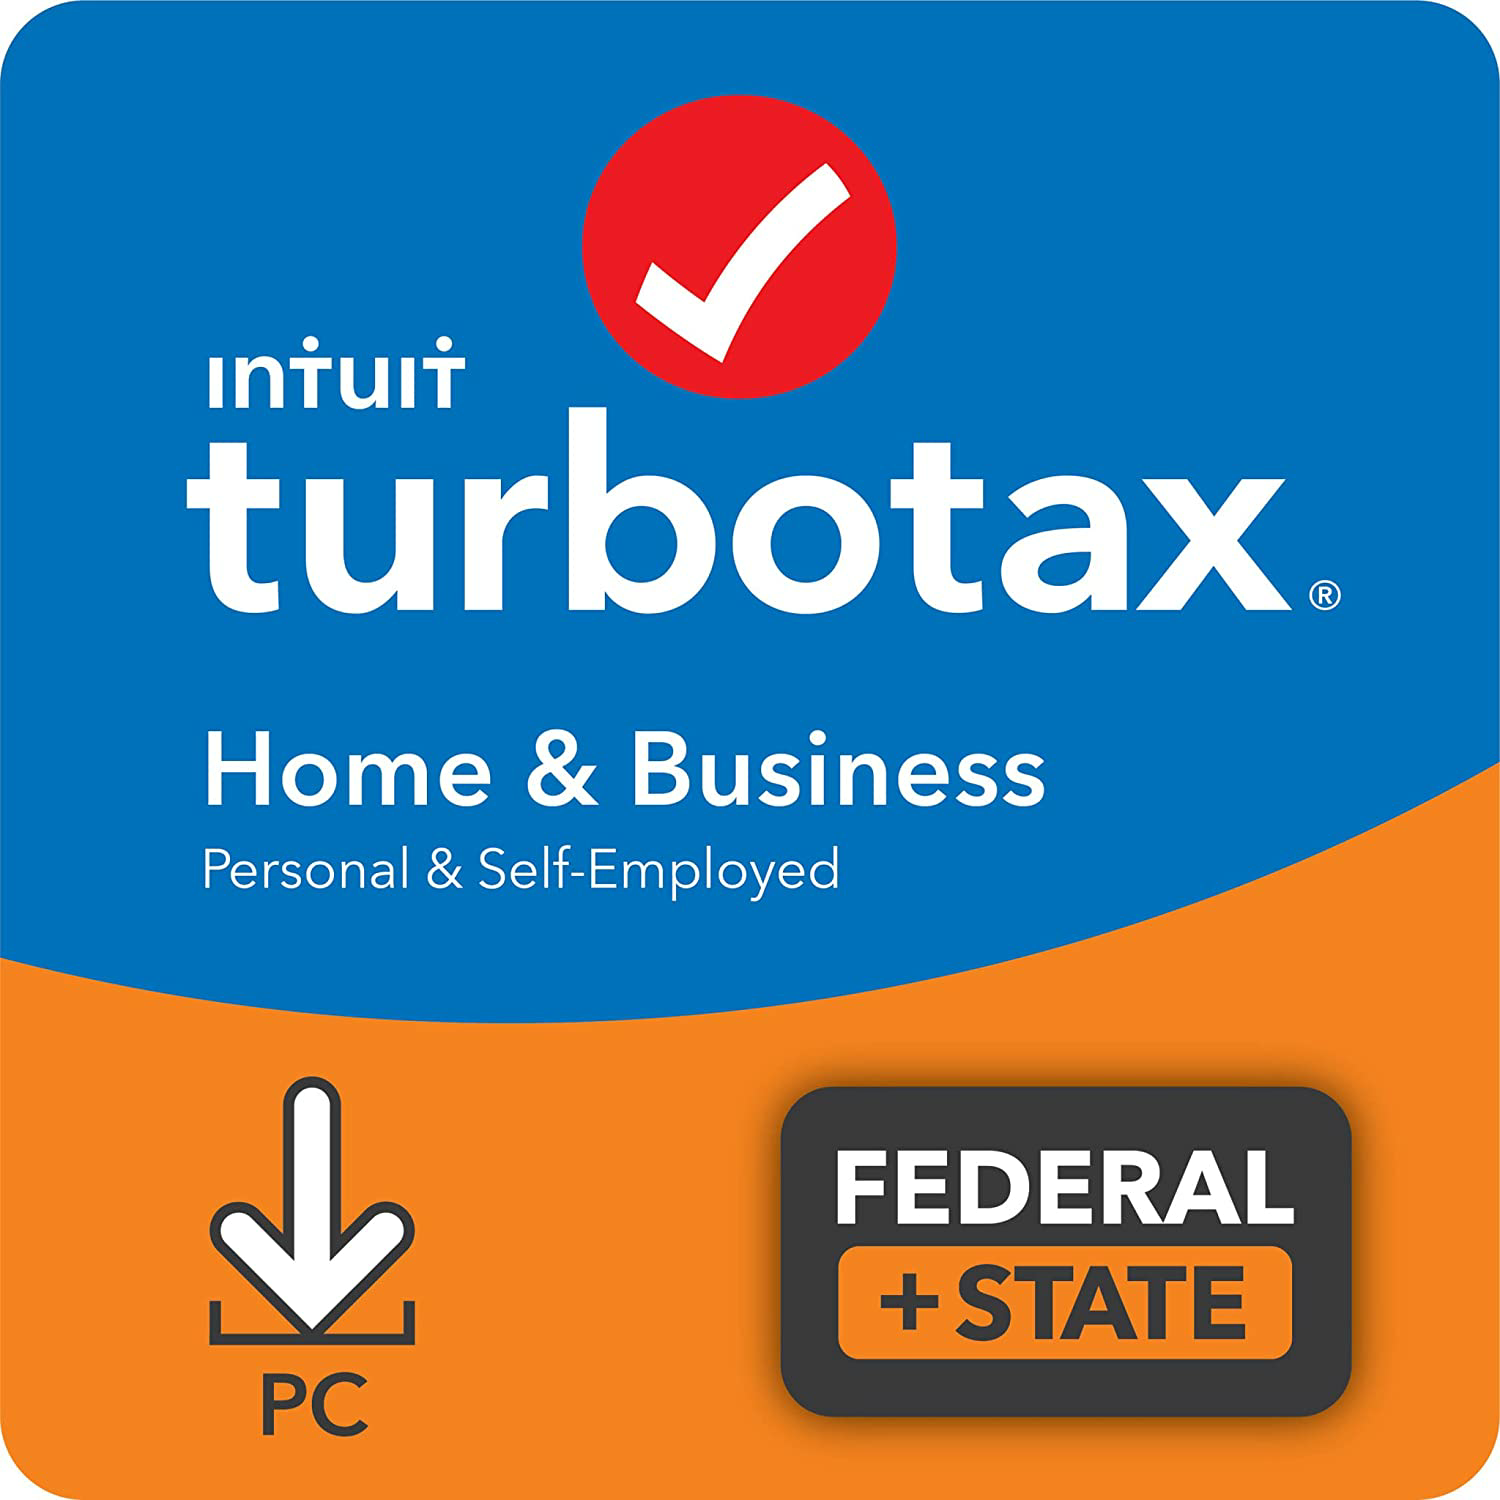 Amazon.com: TurboTax Home & Business 2021 Tax Software, Federal and State Tax Return with Federal E-file [Amazon Exclusive] [PC Download] : Everything Else $79.99